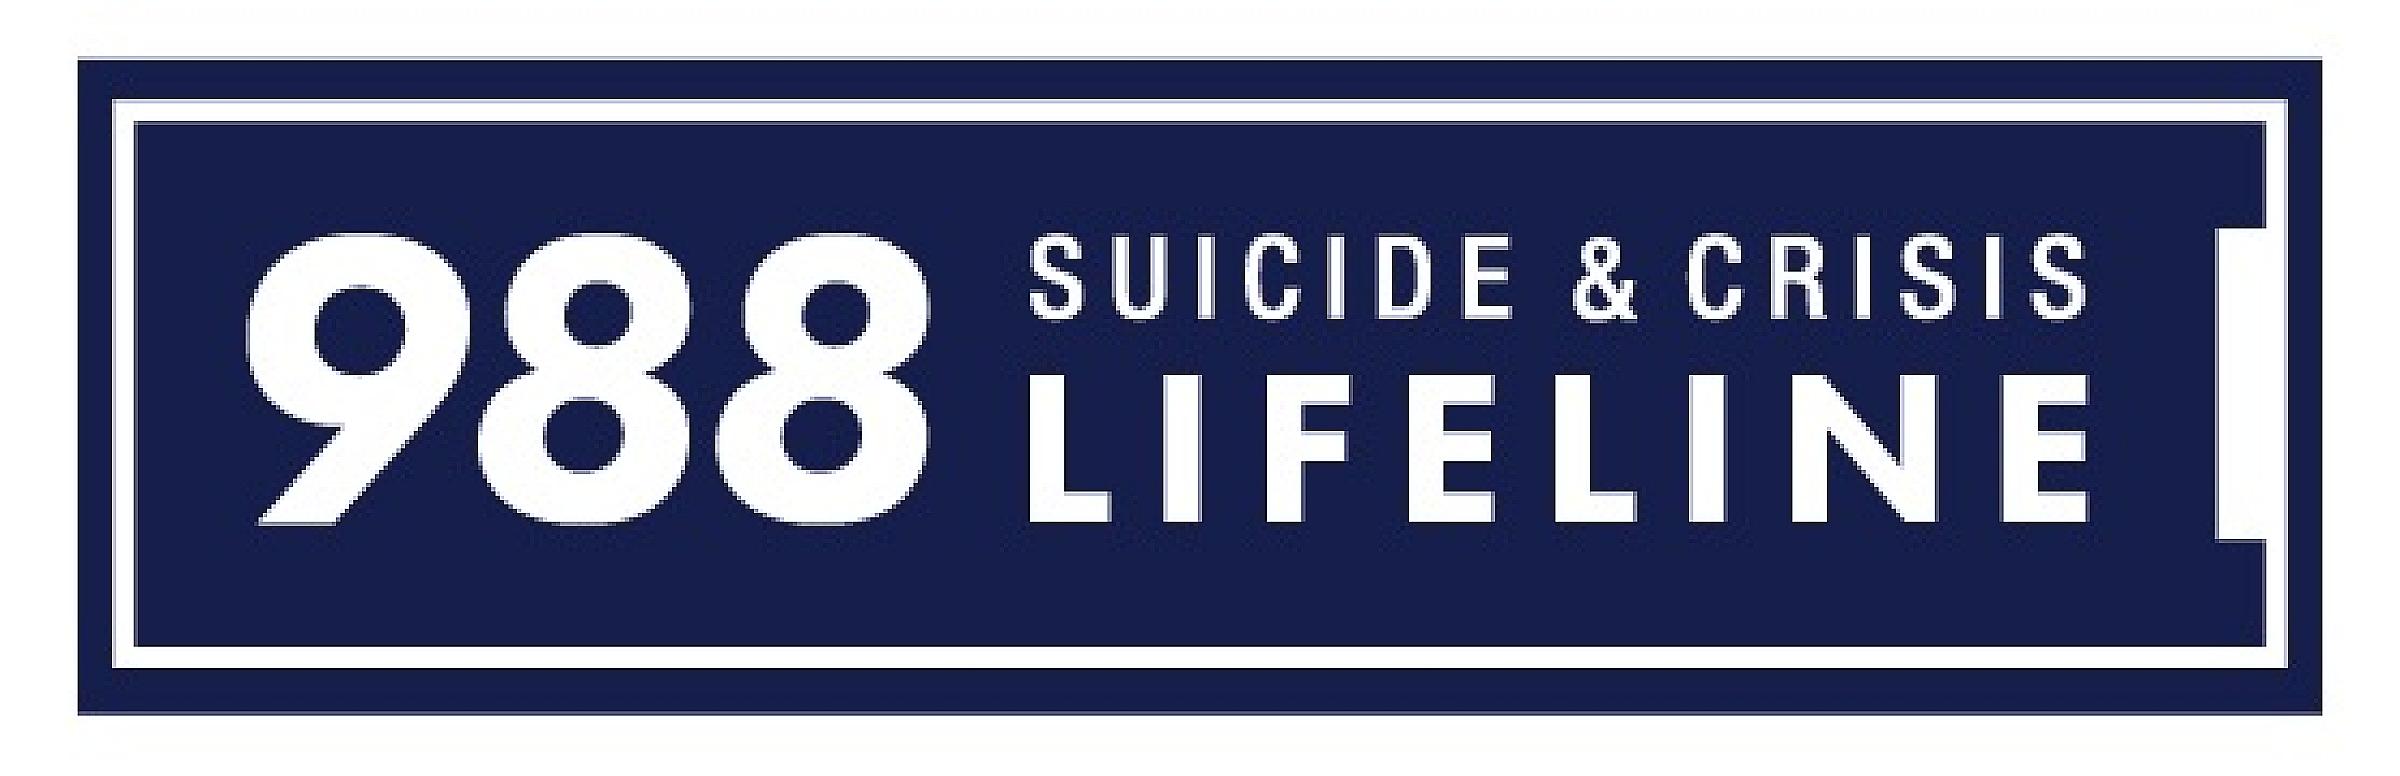 Picture of 988 suicide and crisis lifeline logo in a navy blue rectangle